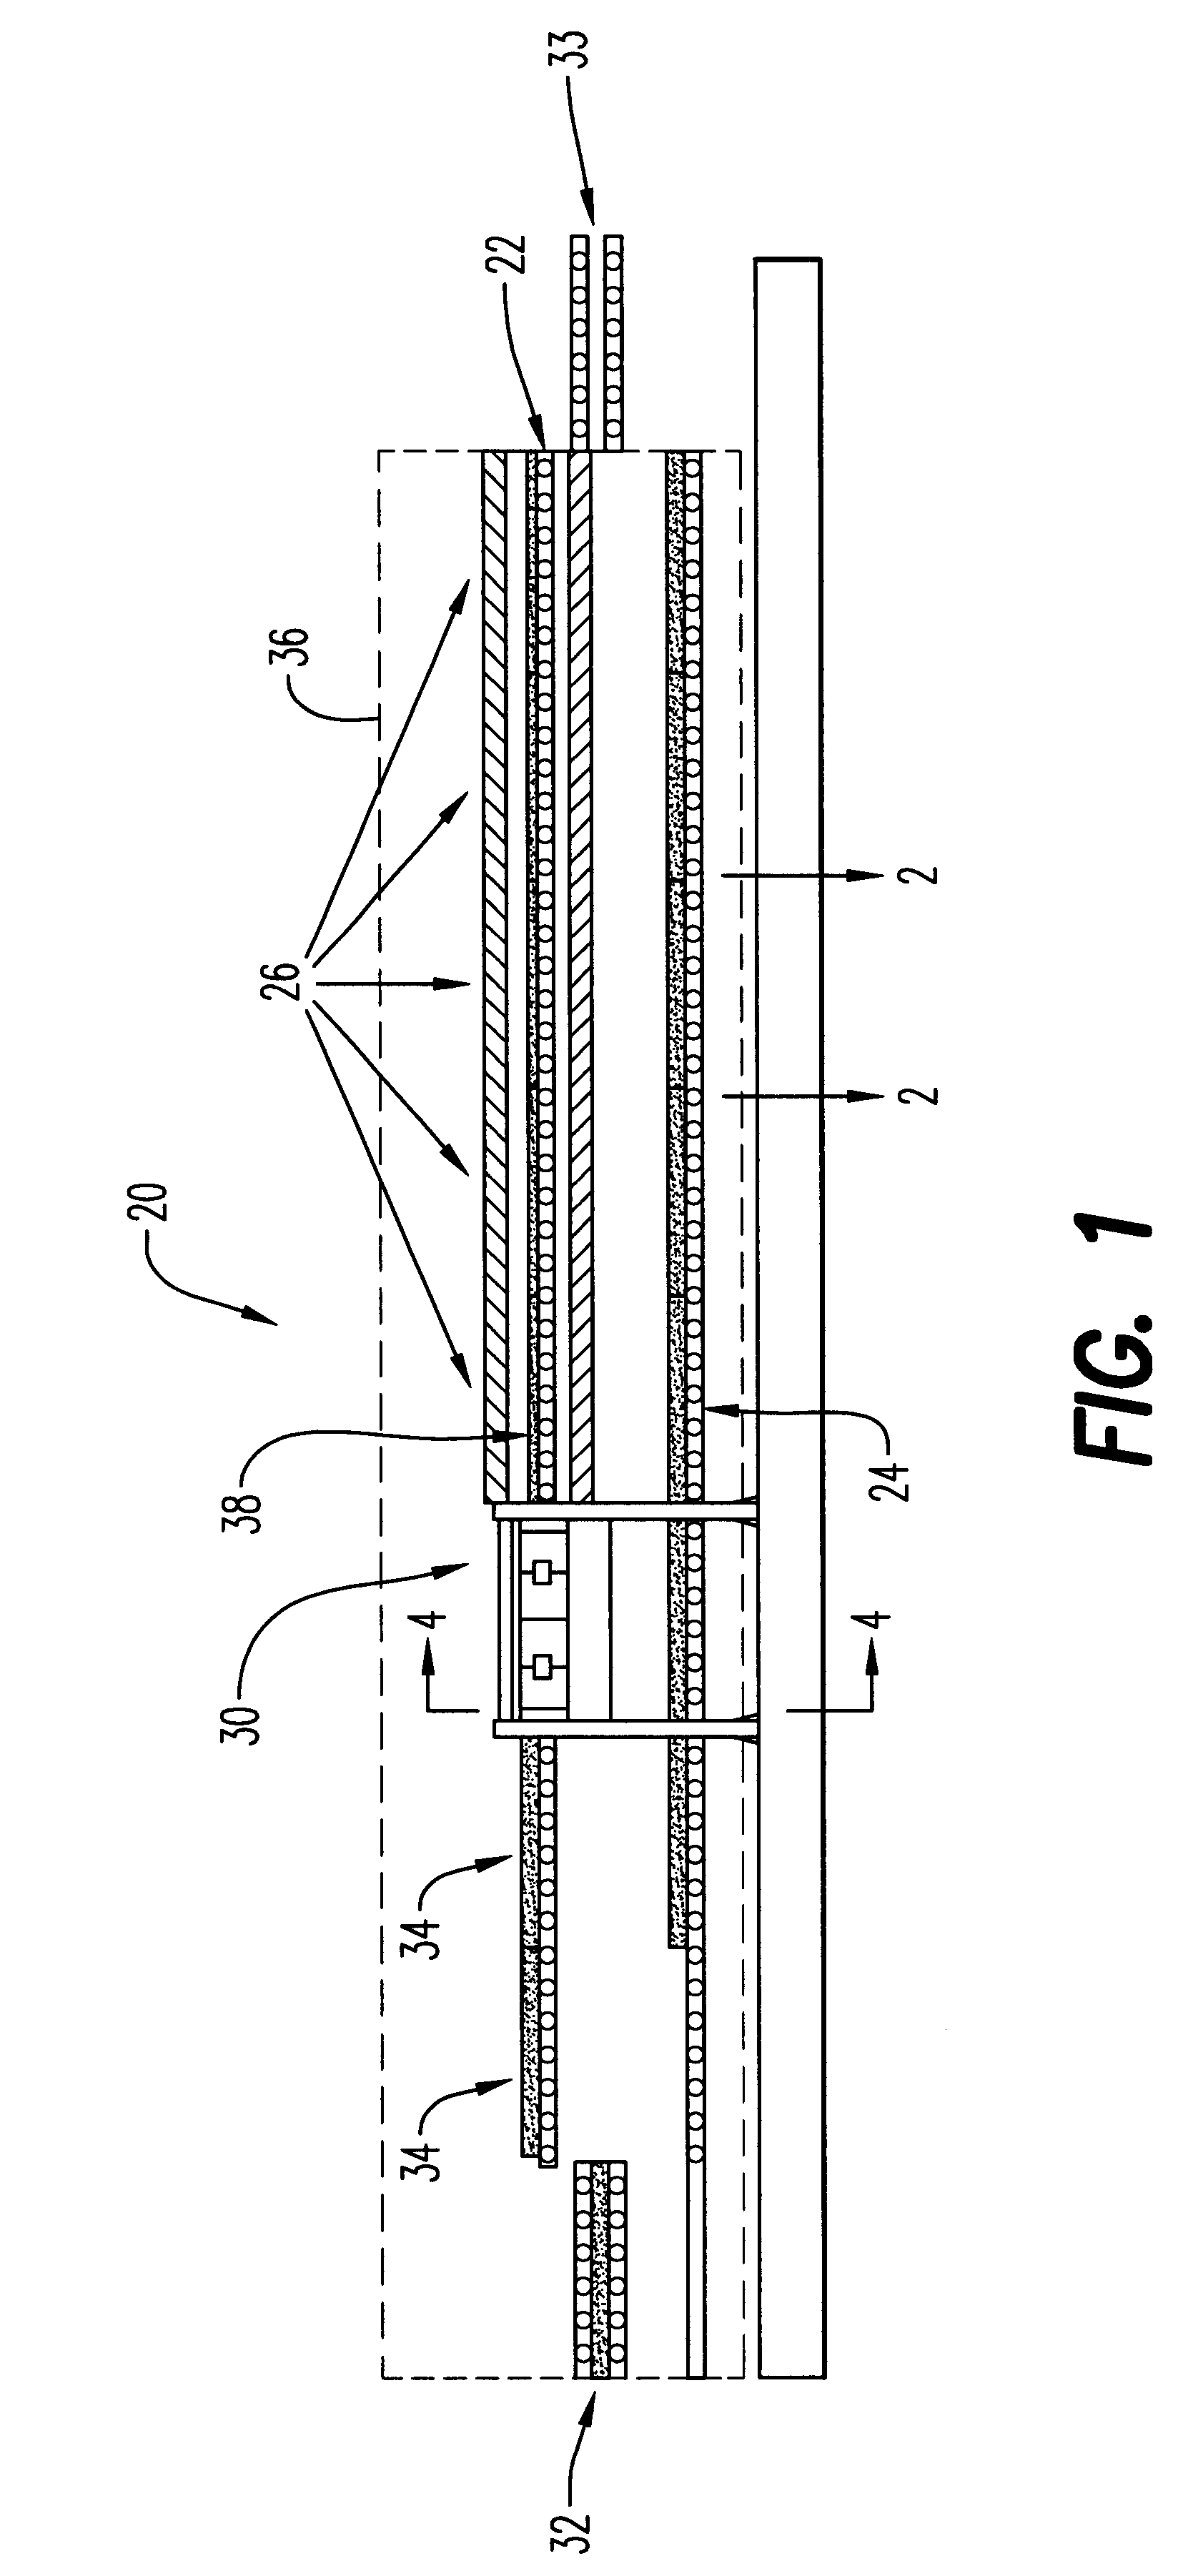 Method for continuously producing expanded thermoformable materials